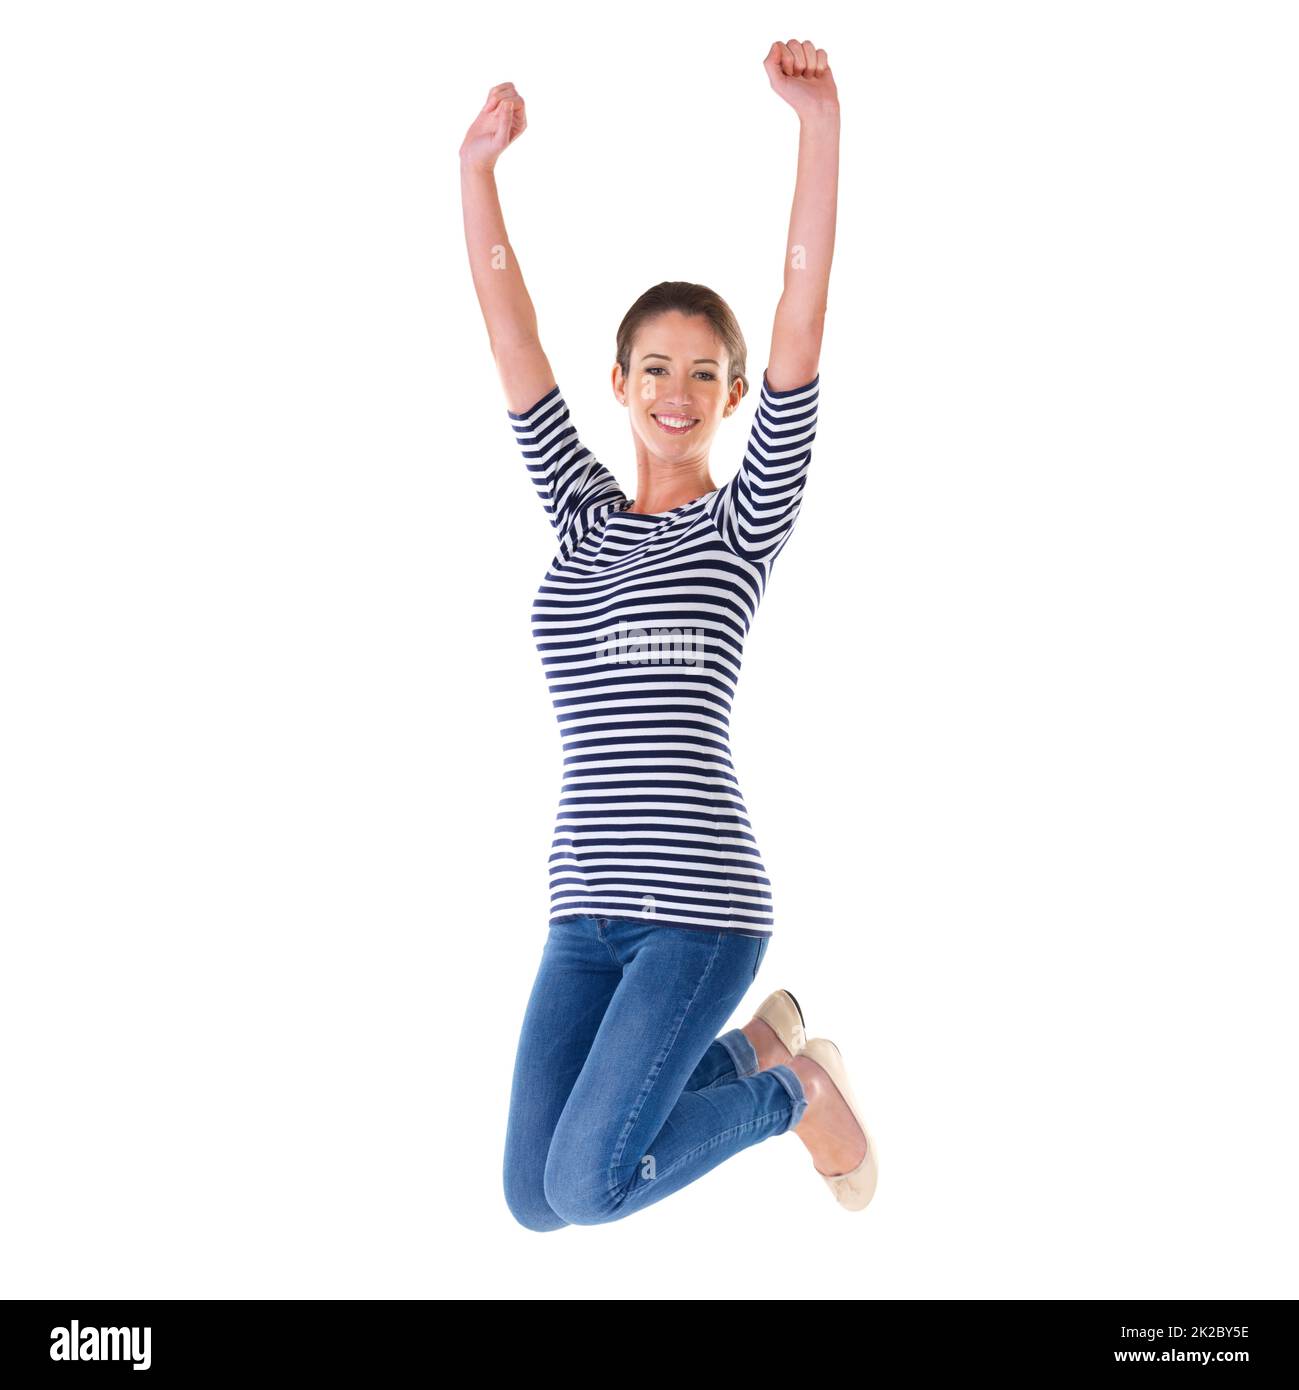 Jumping for joy. Studio shot of an ecstatic young woman jumping in the air isolated on white. Stock Photo